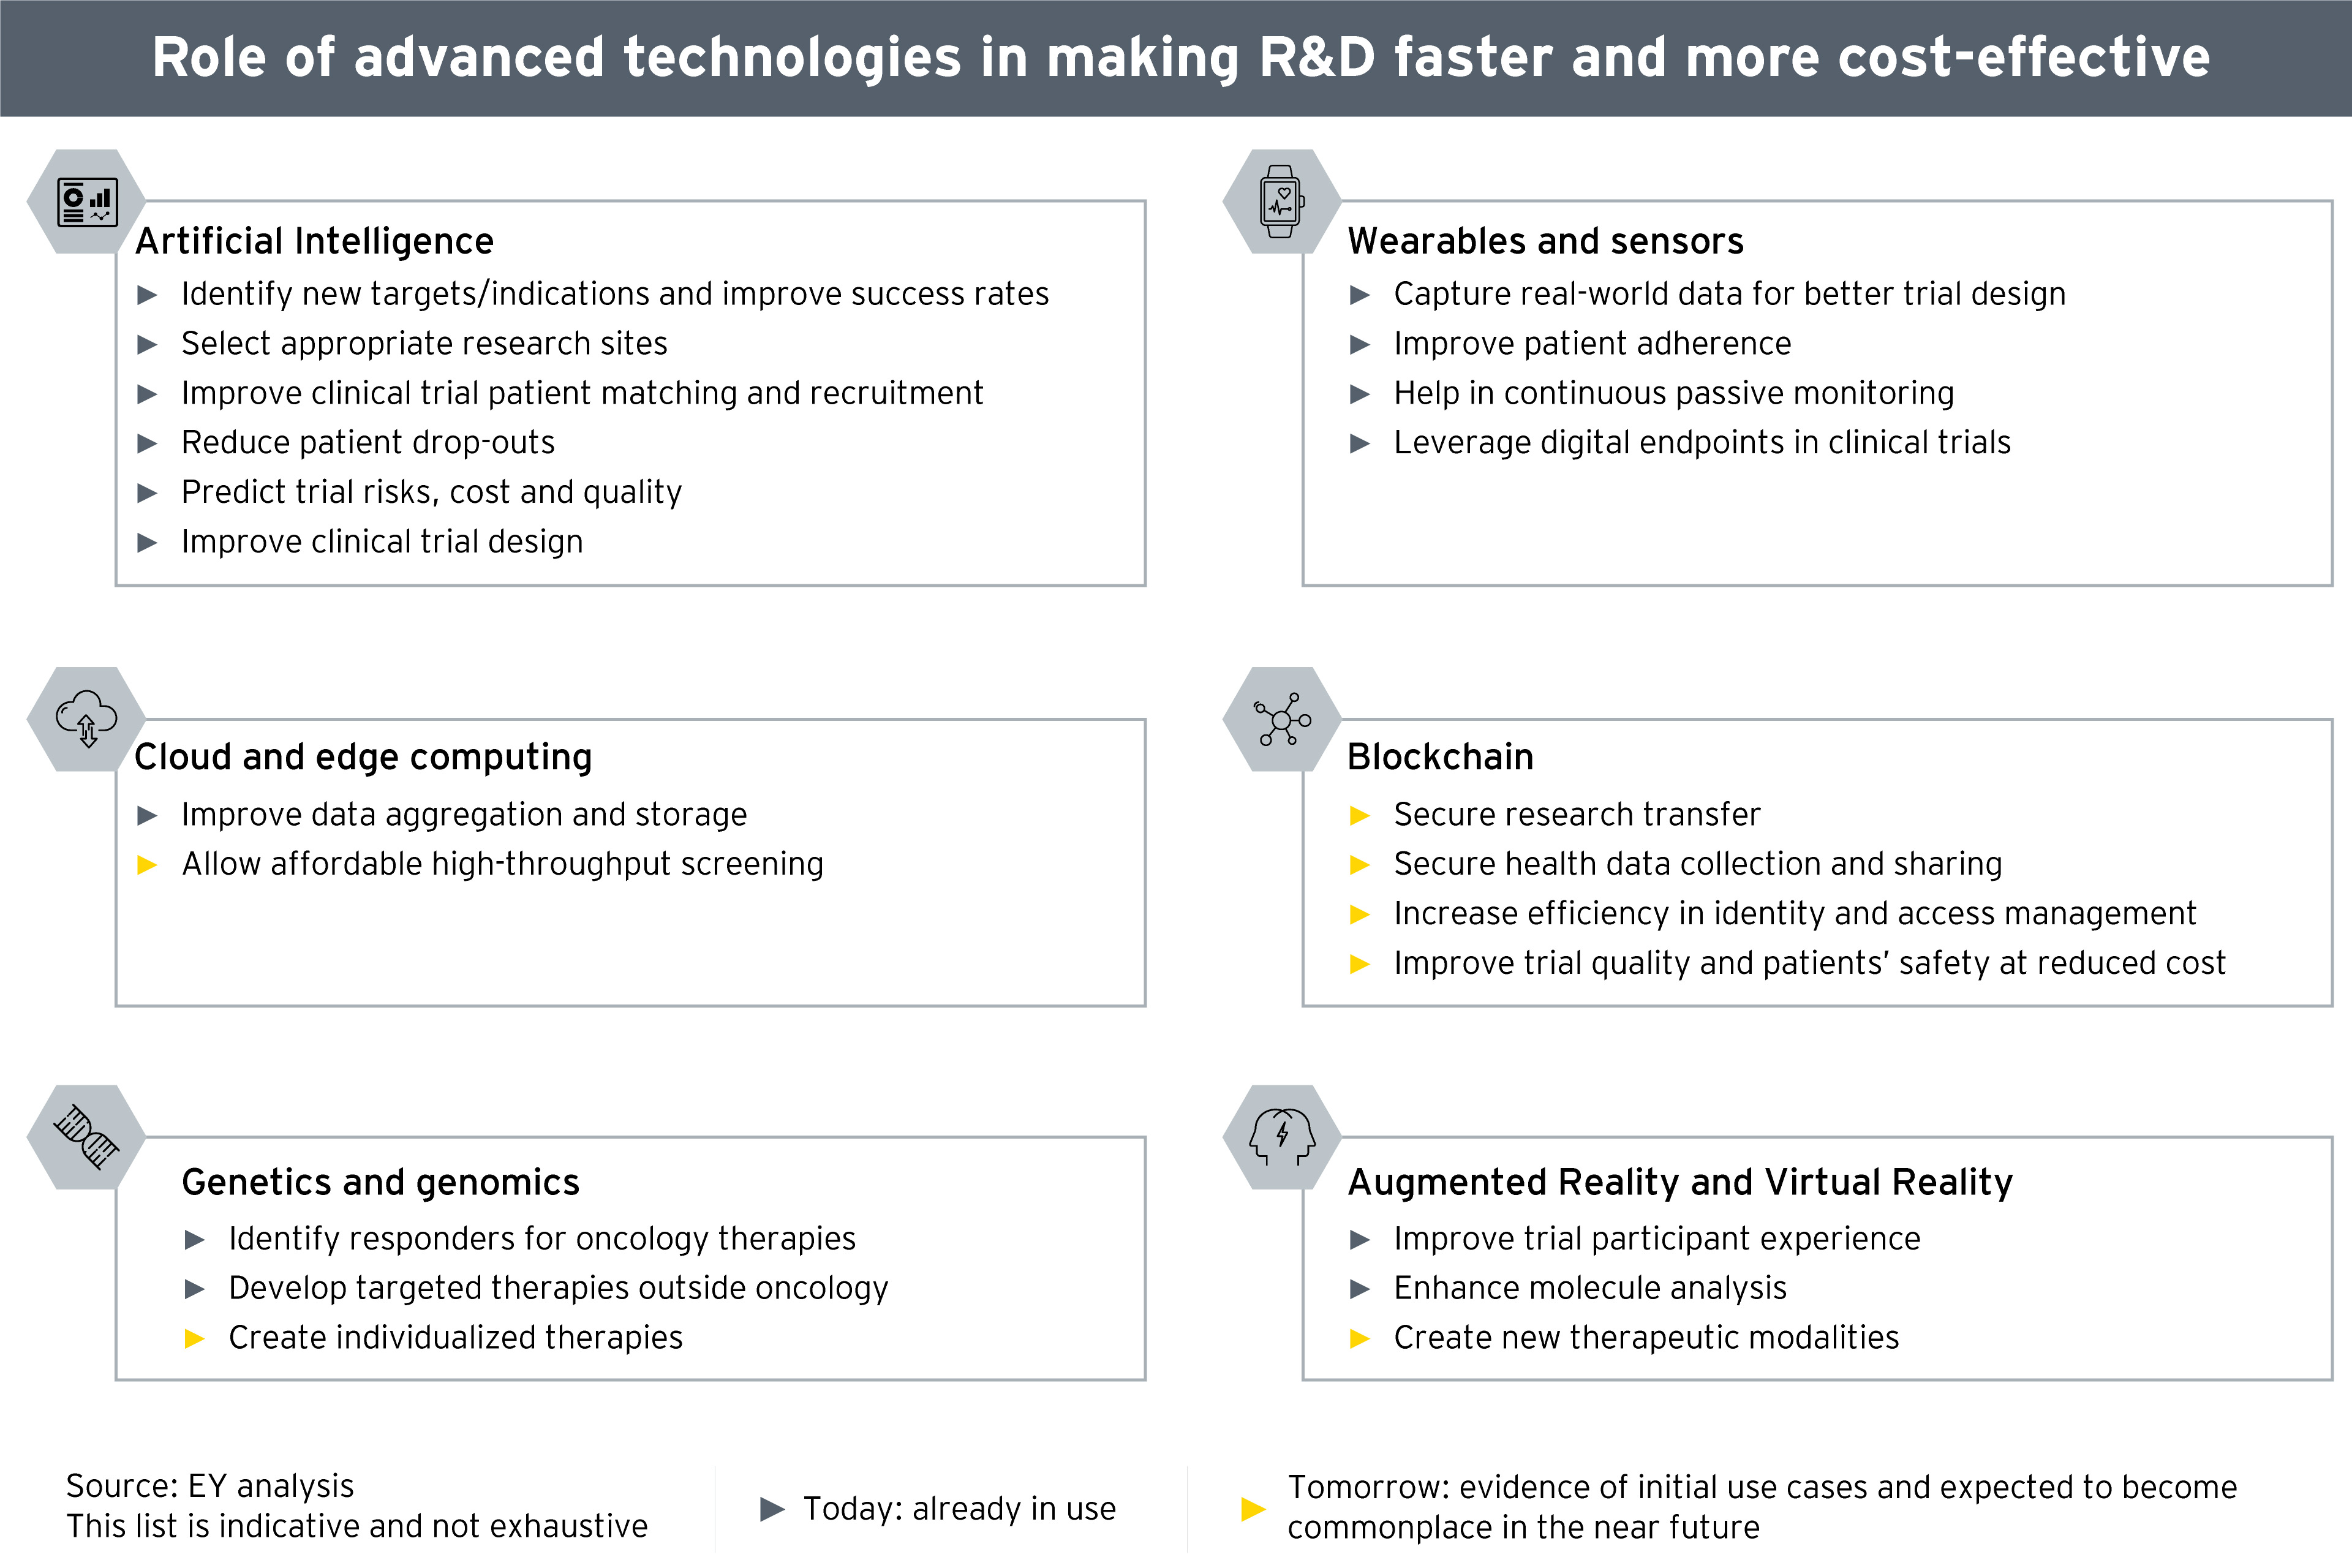 Role of advanced technologies in healthcare 